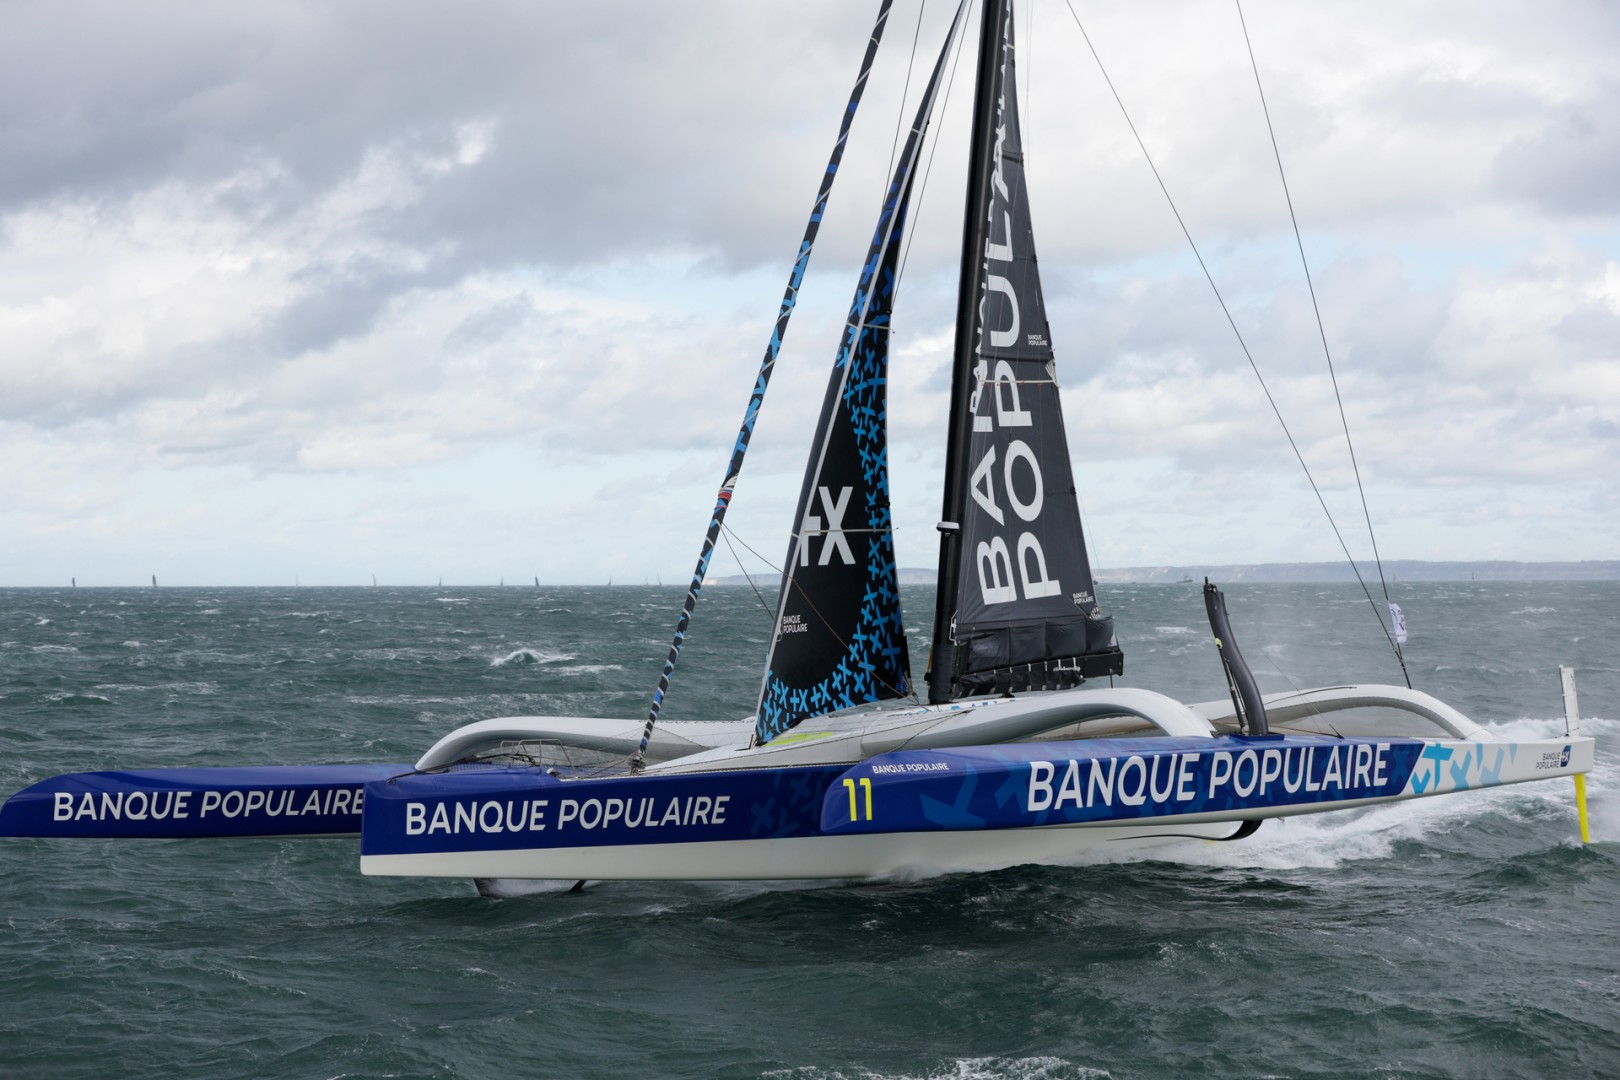 Transat Jacques Vabre ULTIM win is in the bank ?